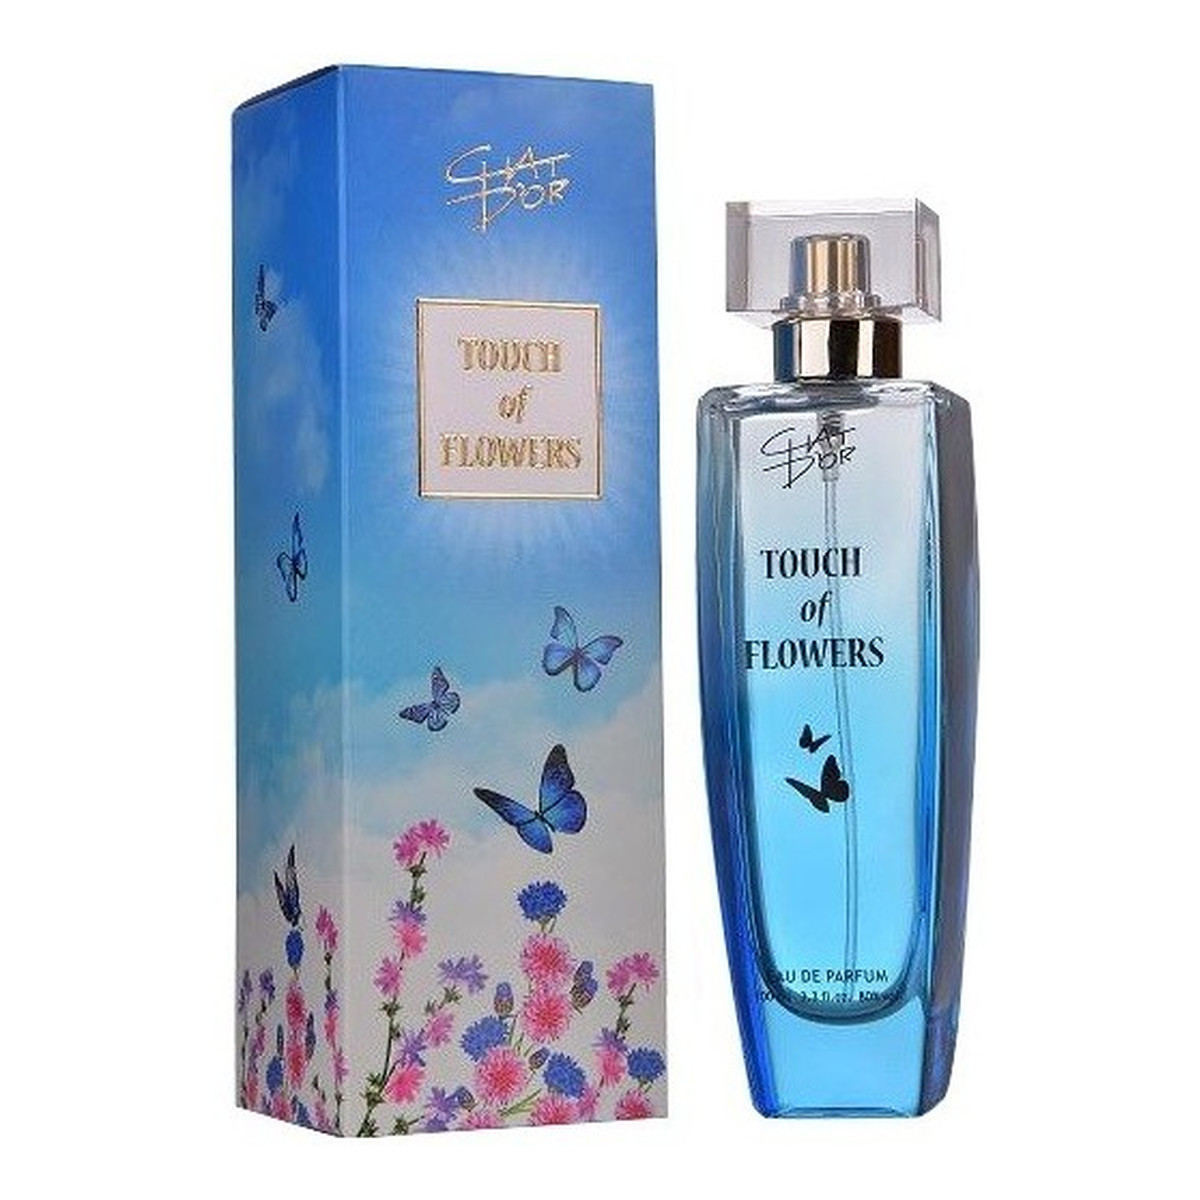 Chat D'or Touch Of Flowers Woda perfumowana 30ml